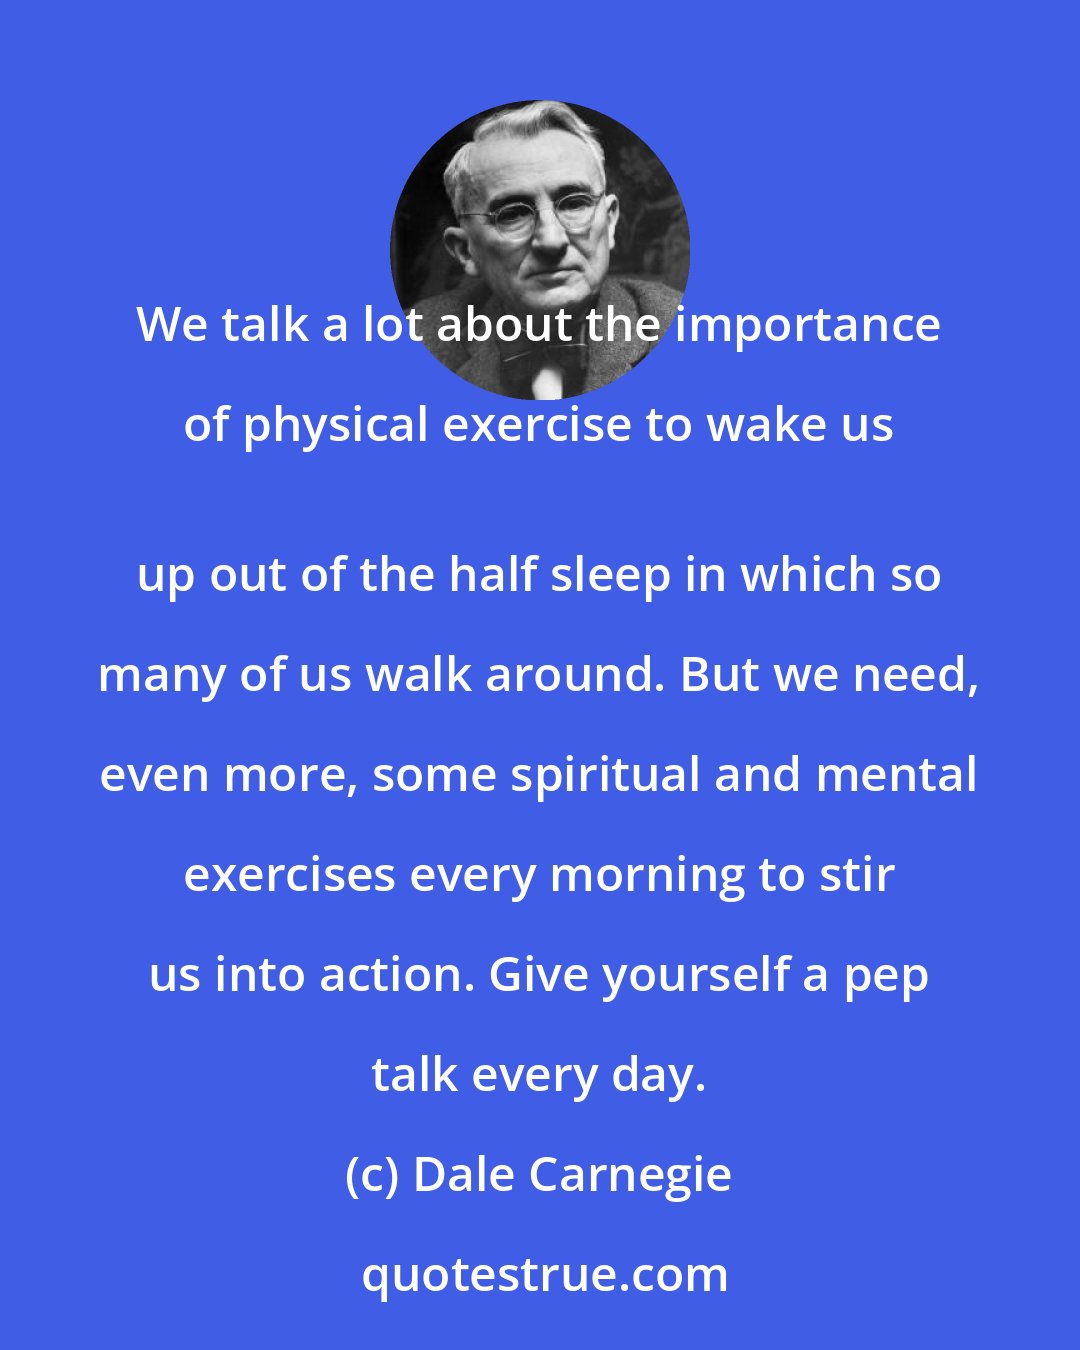 Dale Carnegie: We talk a lot about the importance of physical exercise to wake us 
 up out of the half sleep in which so many of us walk around. But we need, even more, some spiritual and mental exercises every morning to stir us into action. Give yourself a pep talk every day.